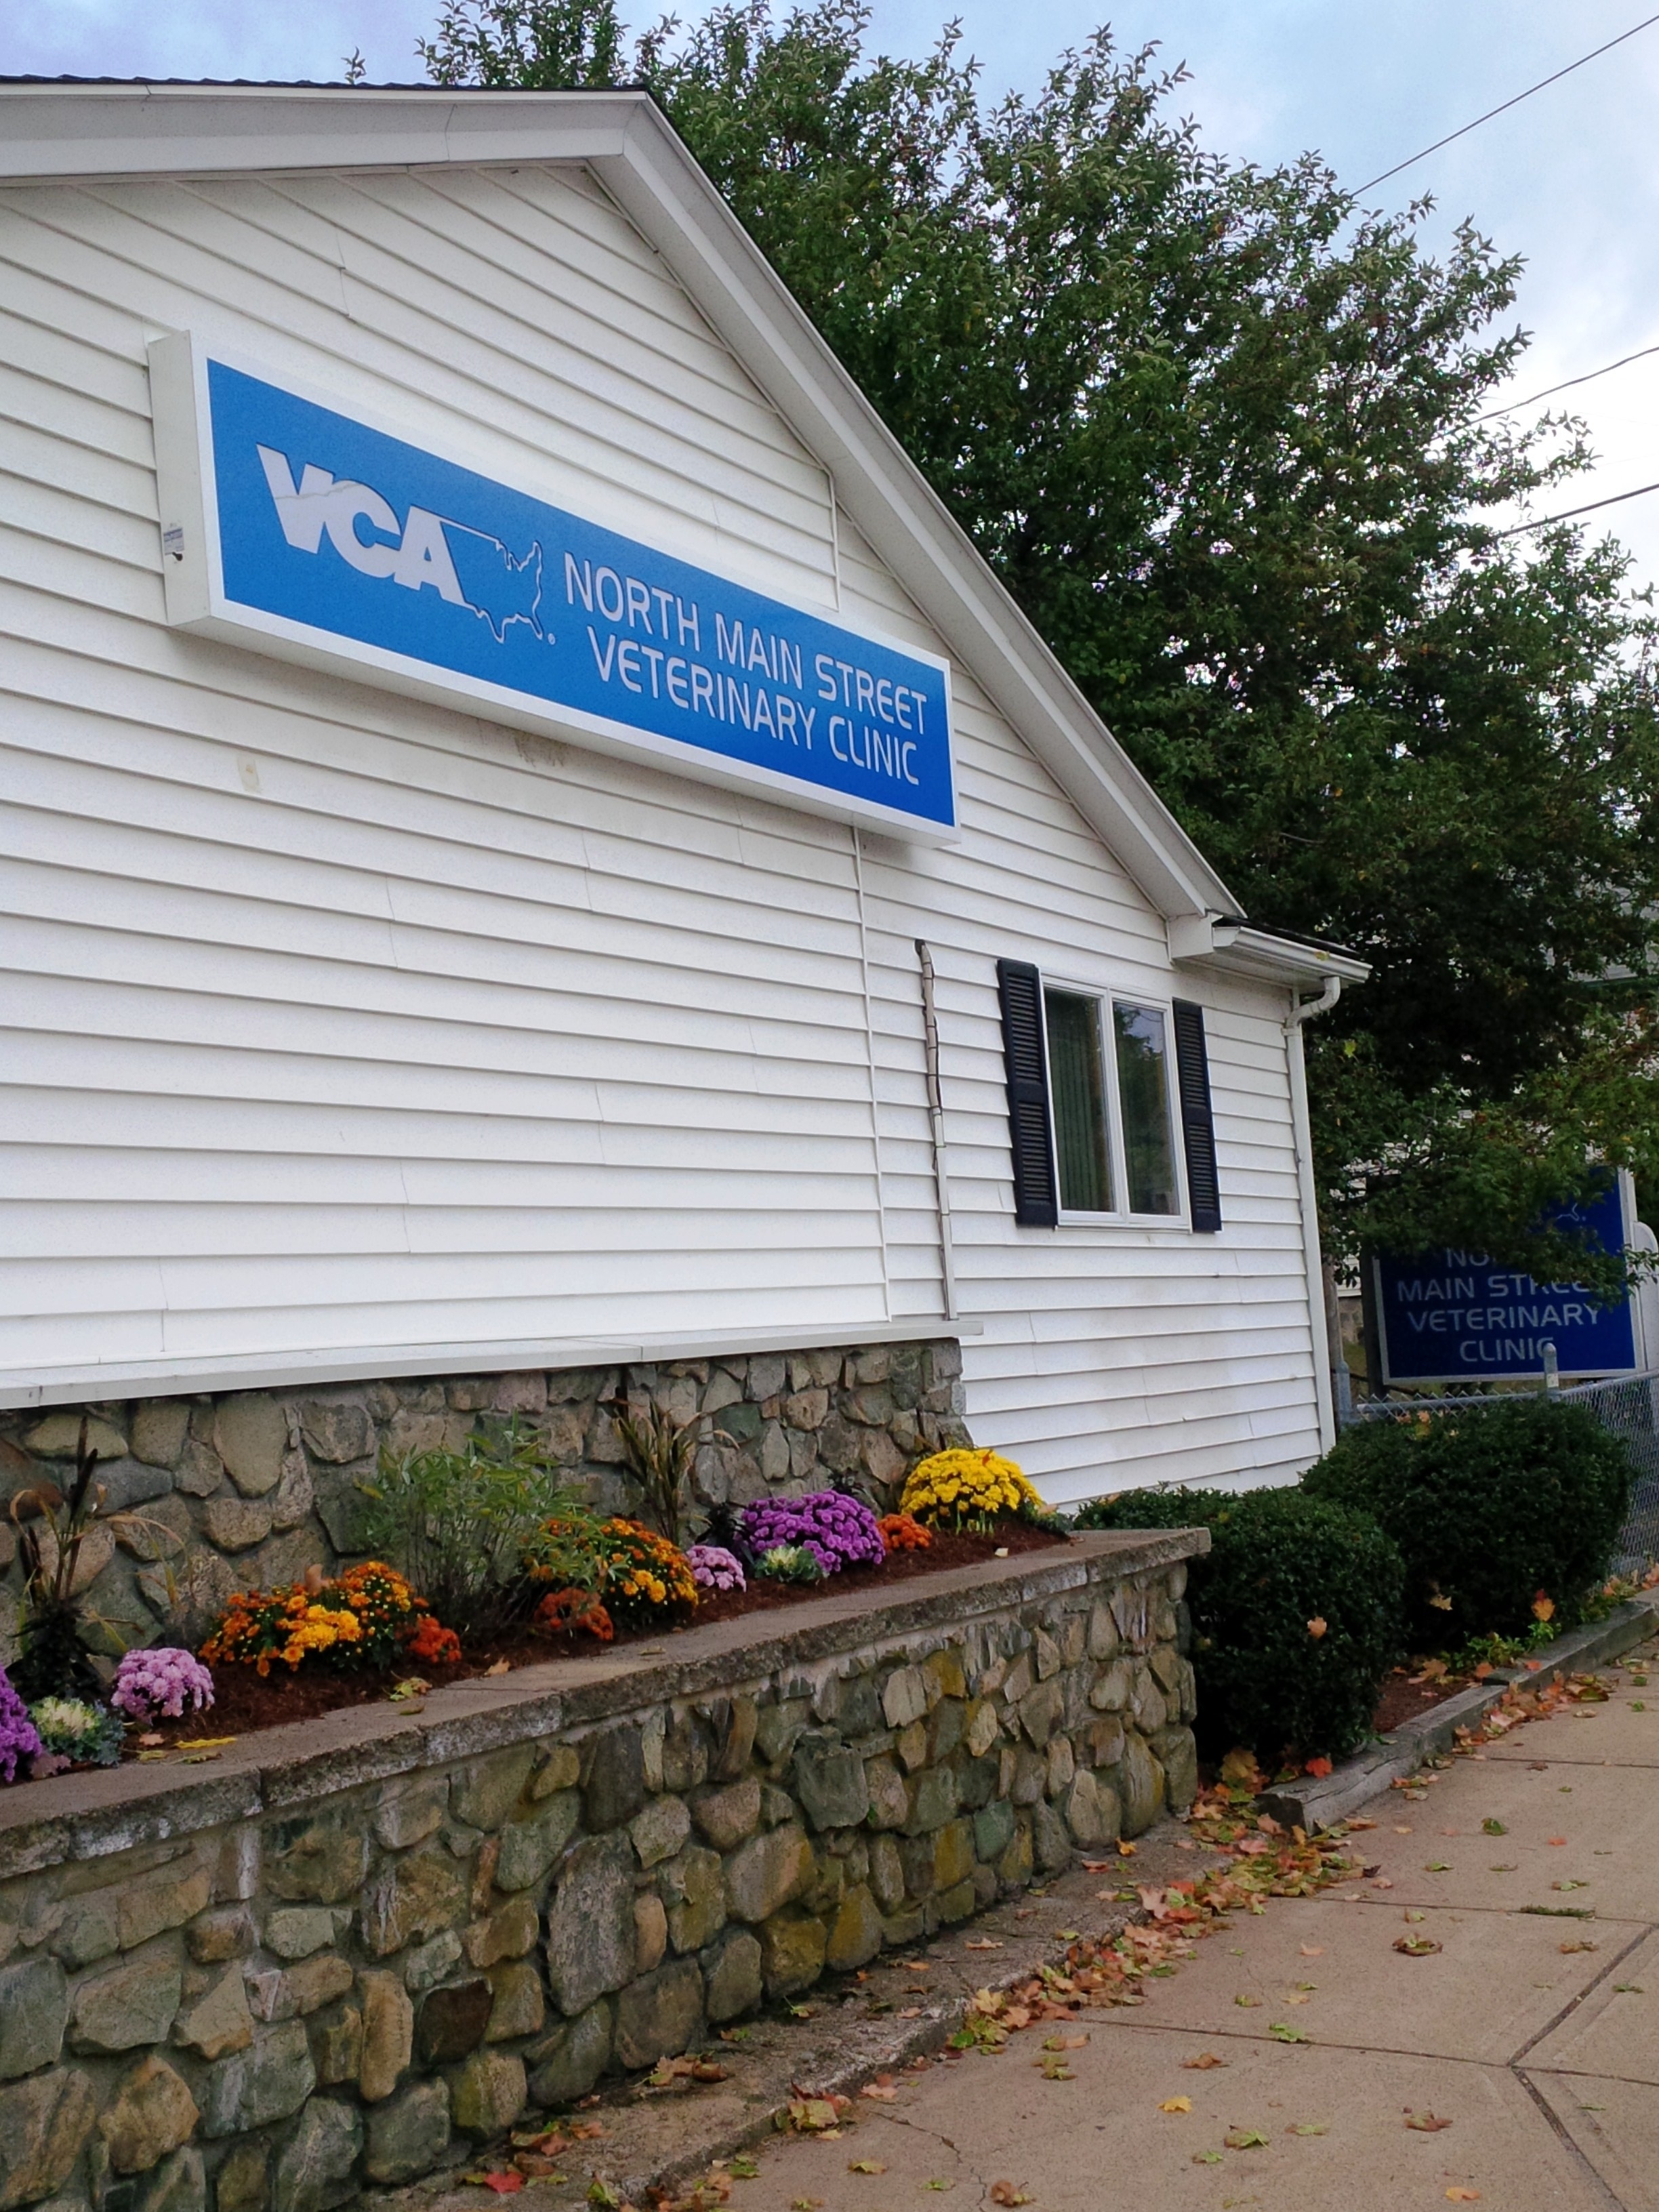 Welcome to VCA North Main Street Veterinary Clinic!